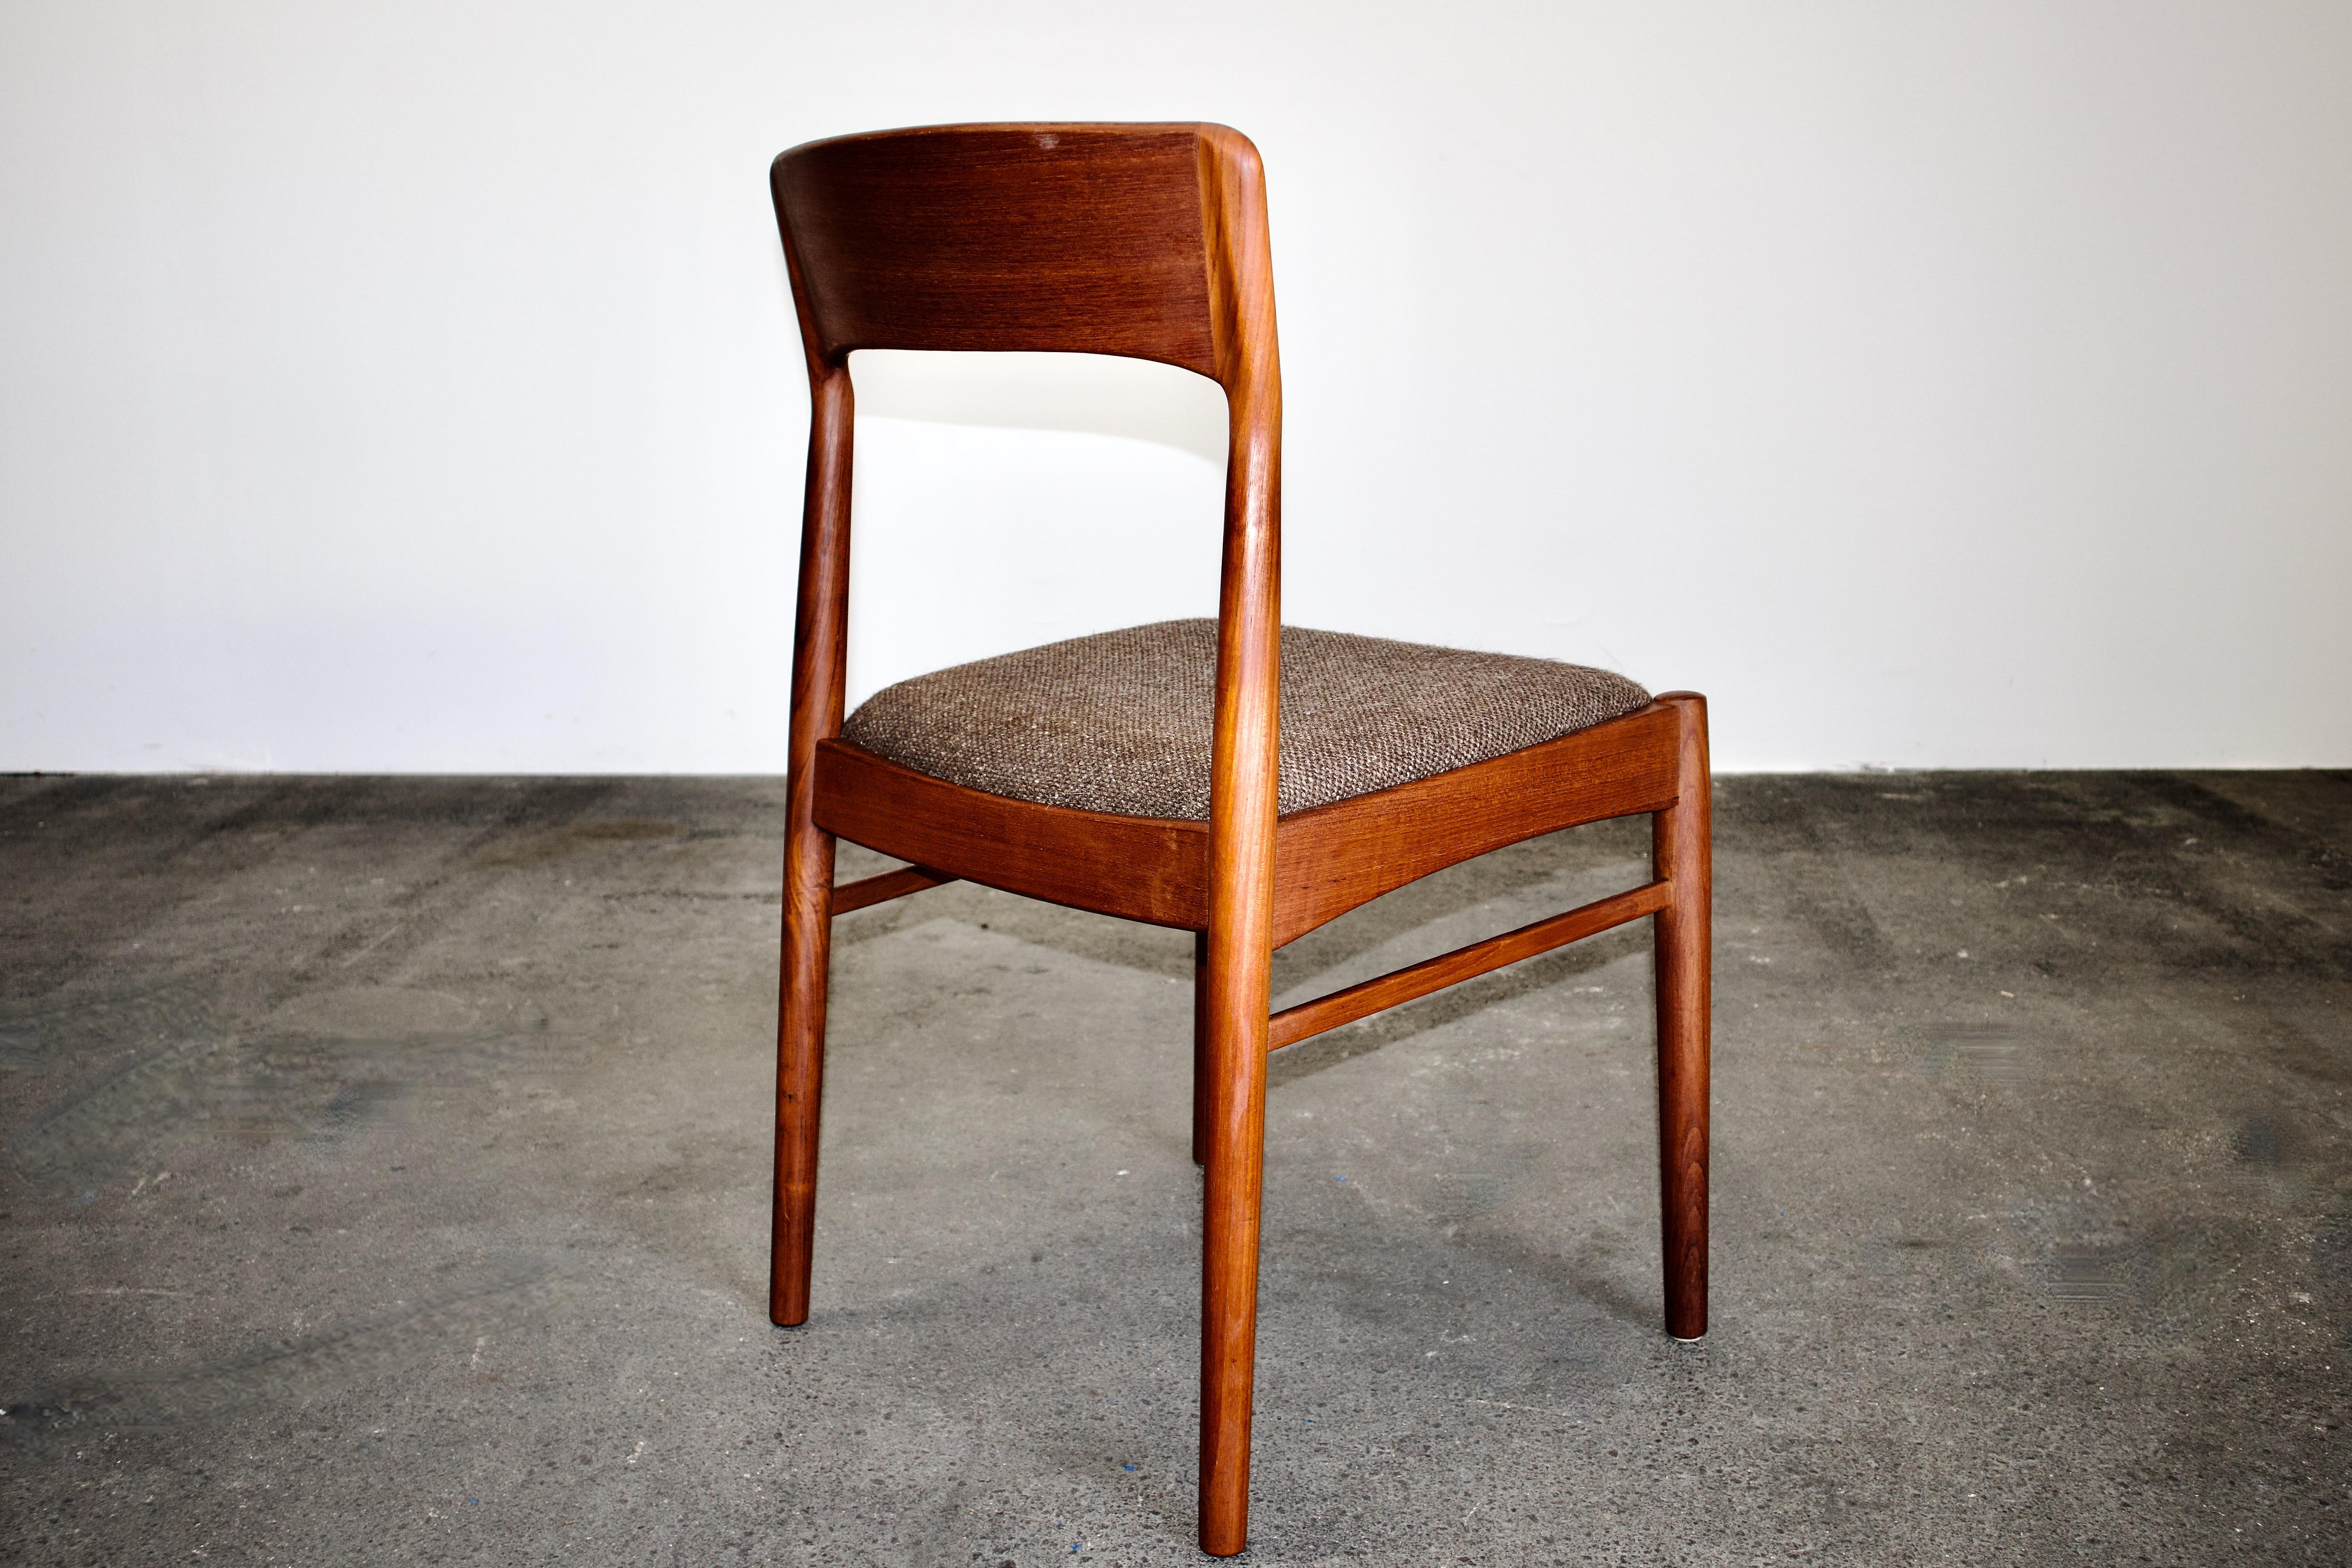 Quirky 1960s Danish Teak Chairs By Kai Kristiansen for K.S. Mobler In Good Condition For Sale In Grand Cayman, KY